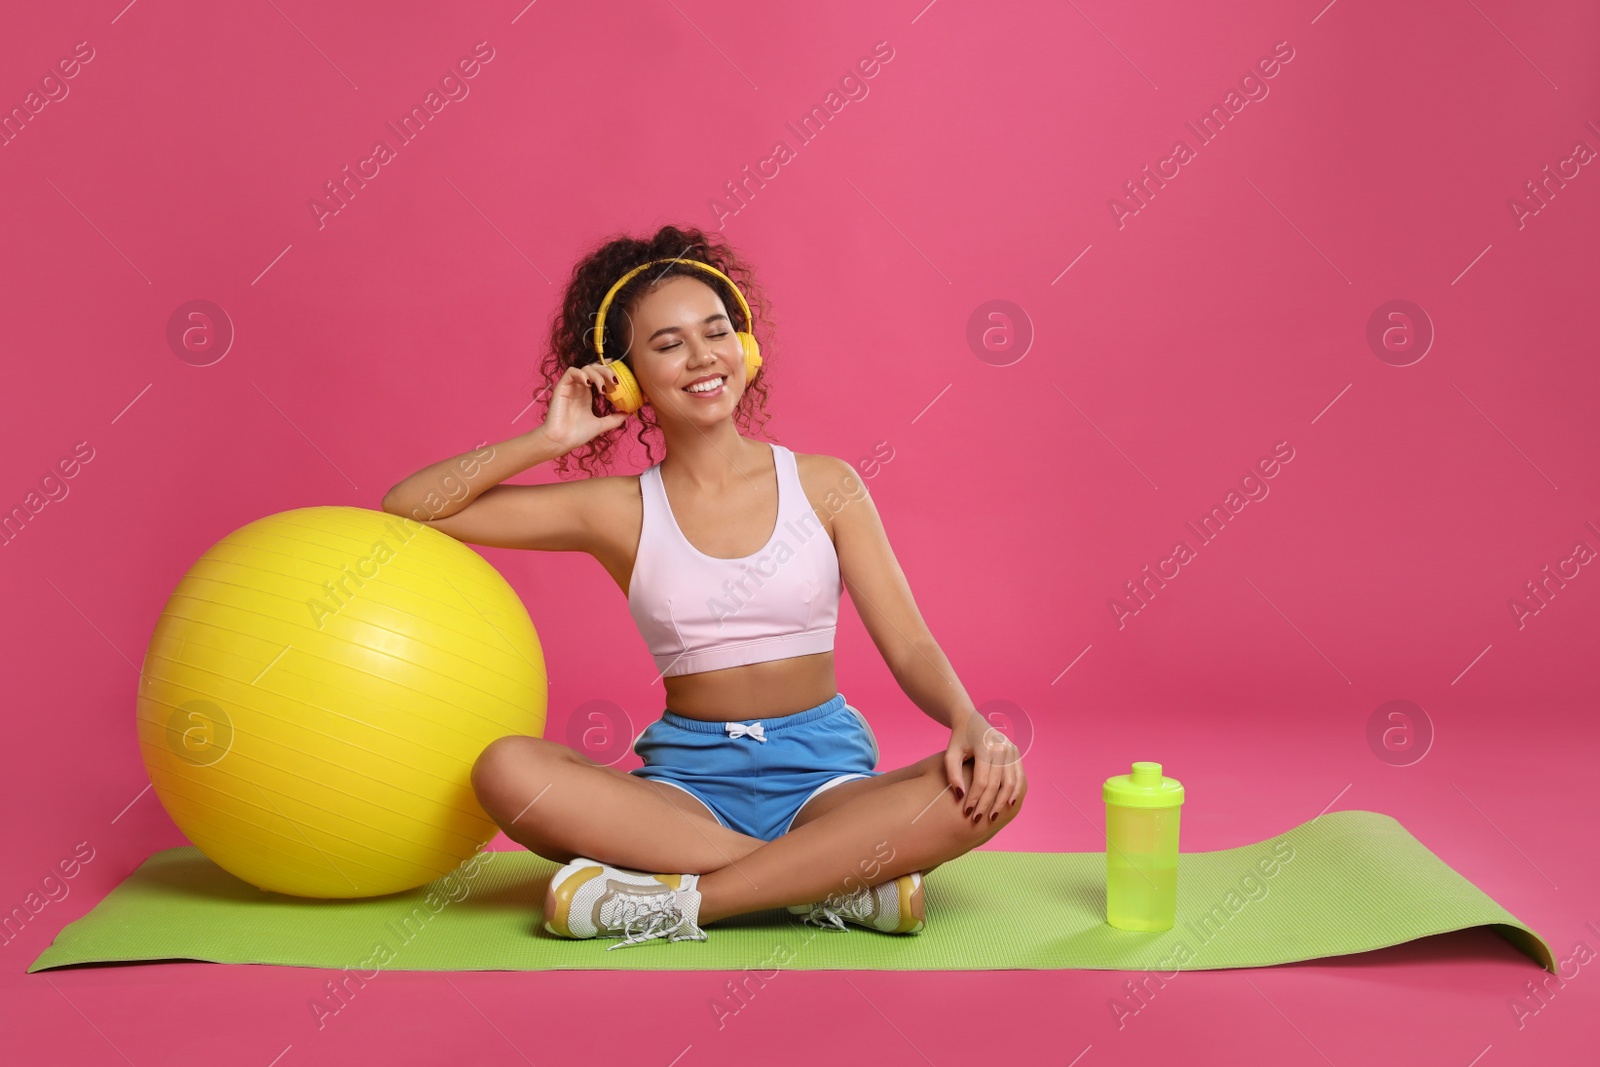 Photo of Beautiful African American woman with headphones  on yoga mat against pink background